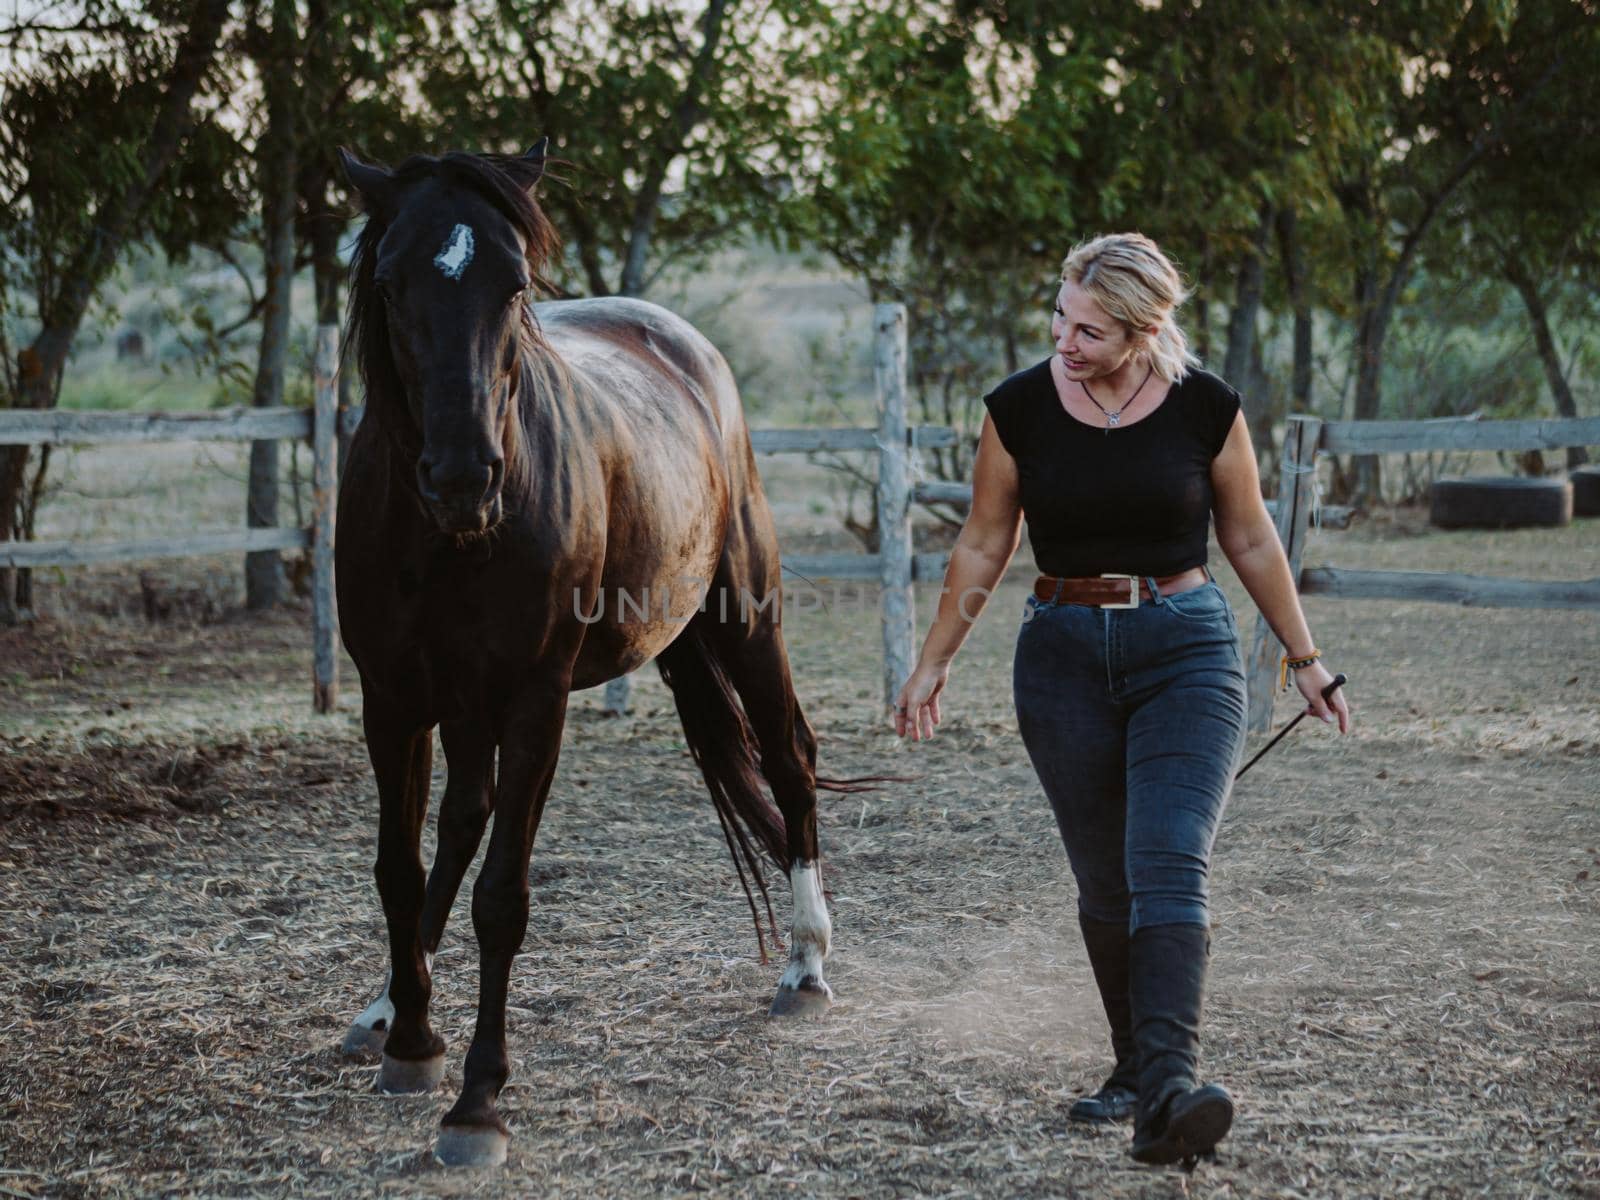 Horse training on country ranch. Beautiful woman runs next to stallion in a corral. concept of farm animals, training, horse racing, nature. High quality photo